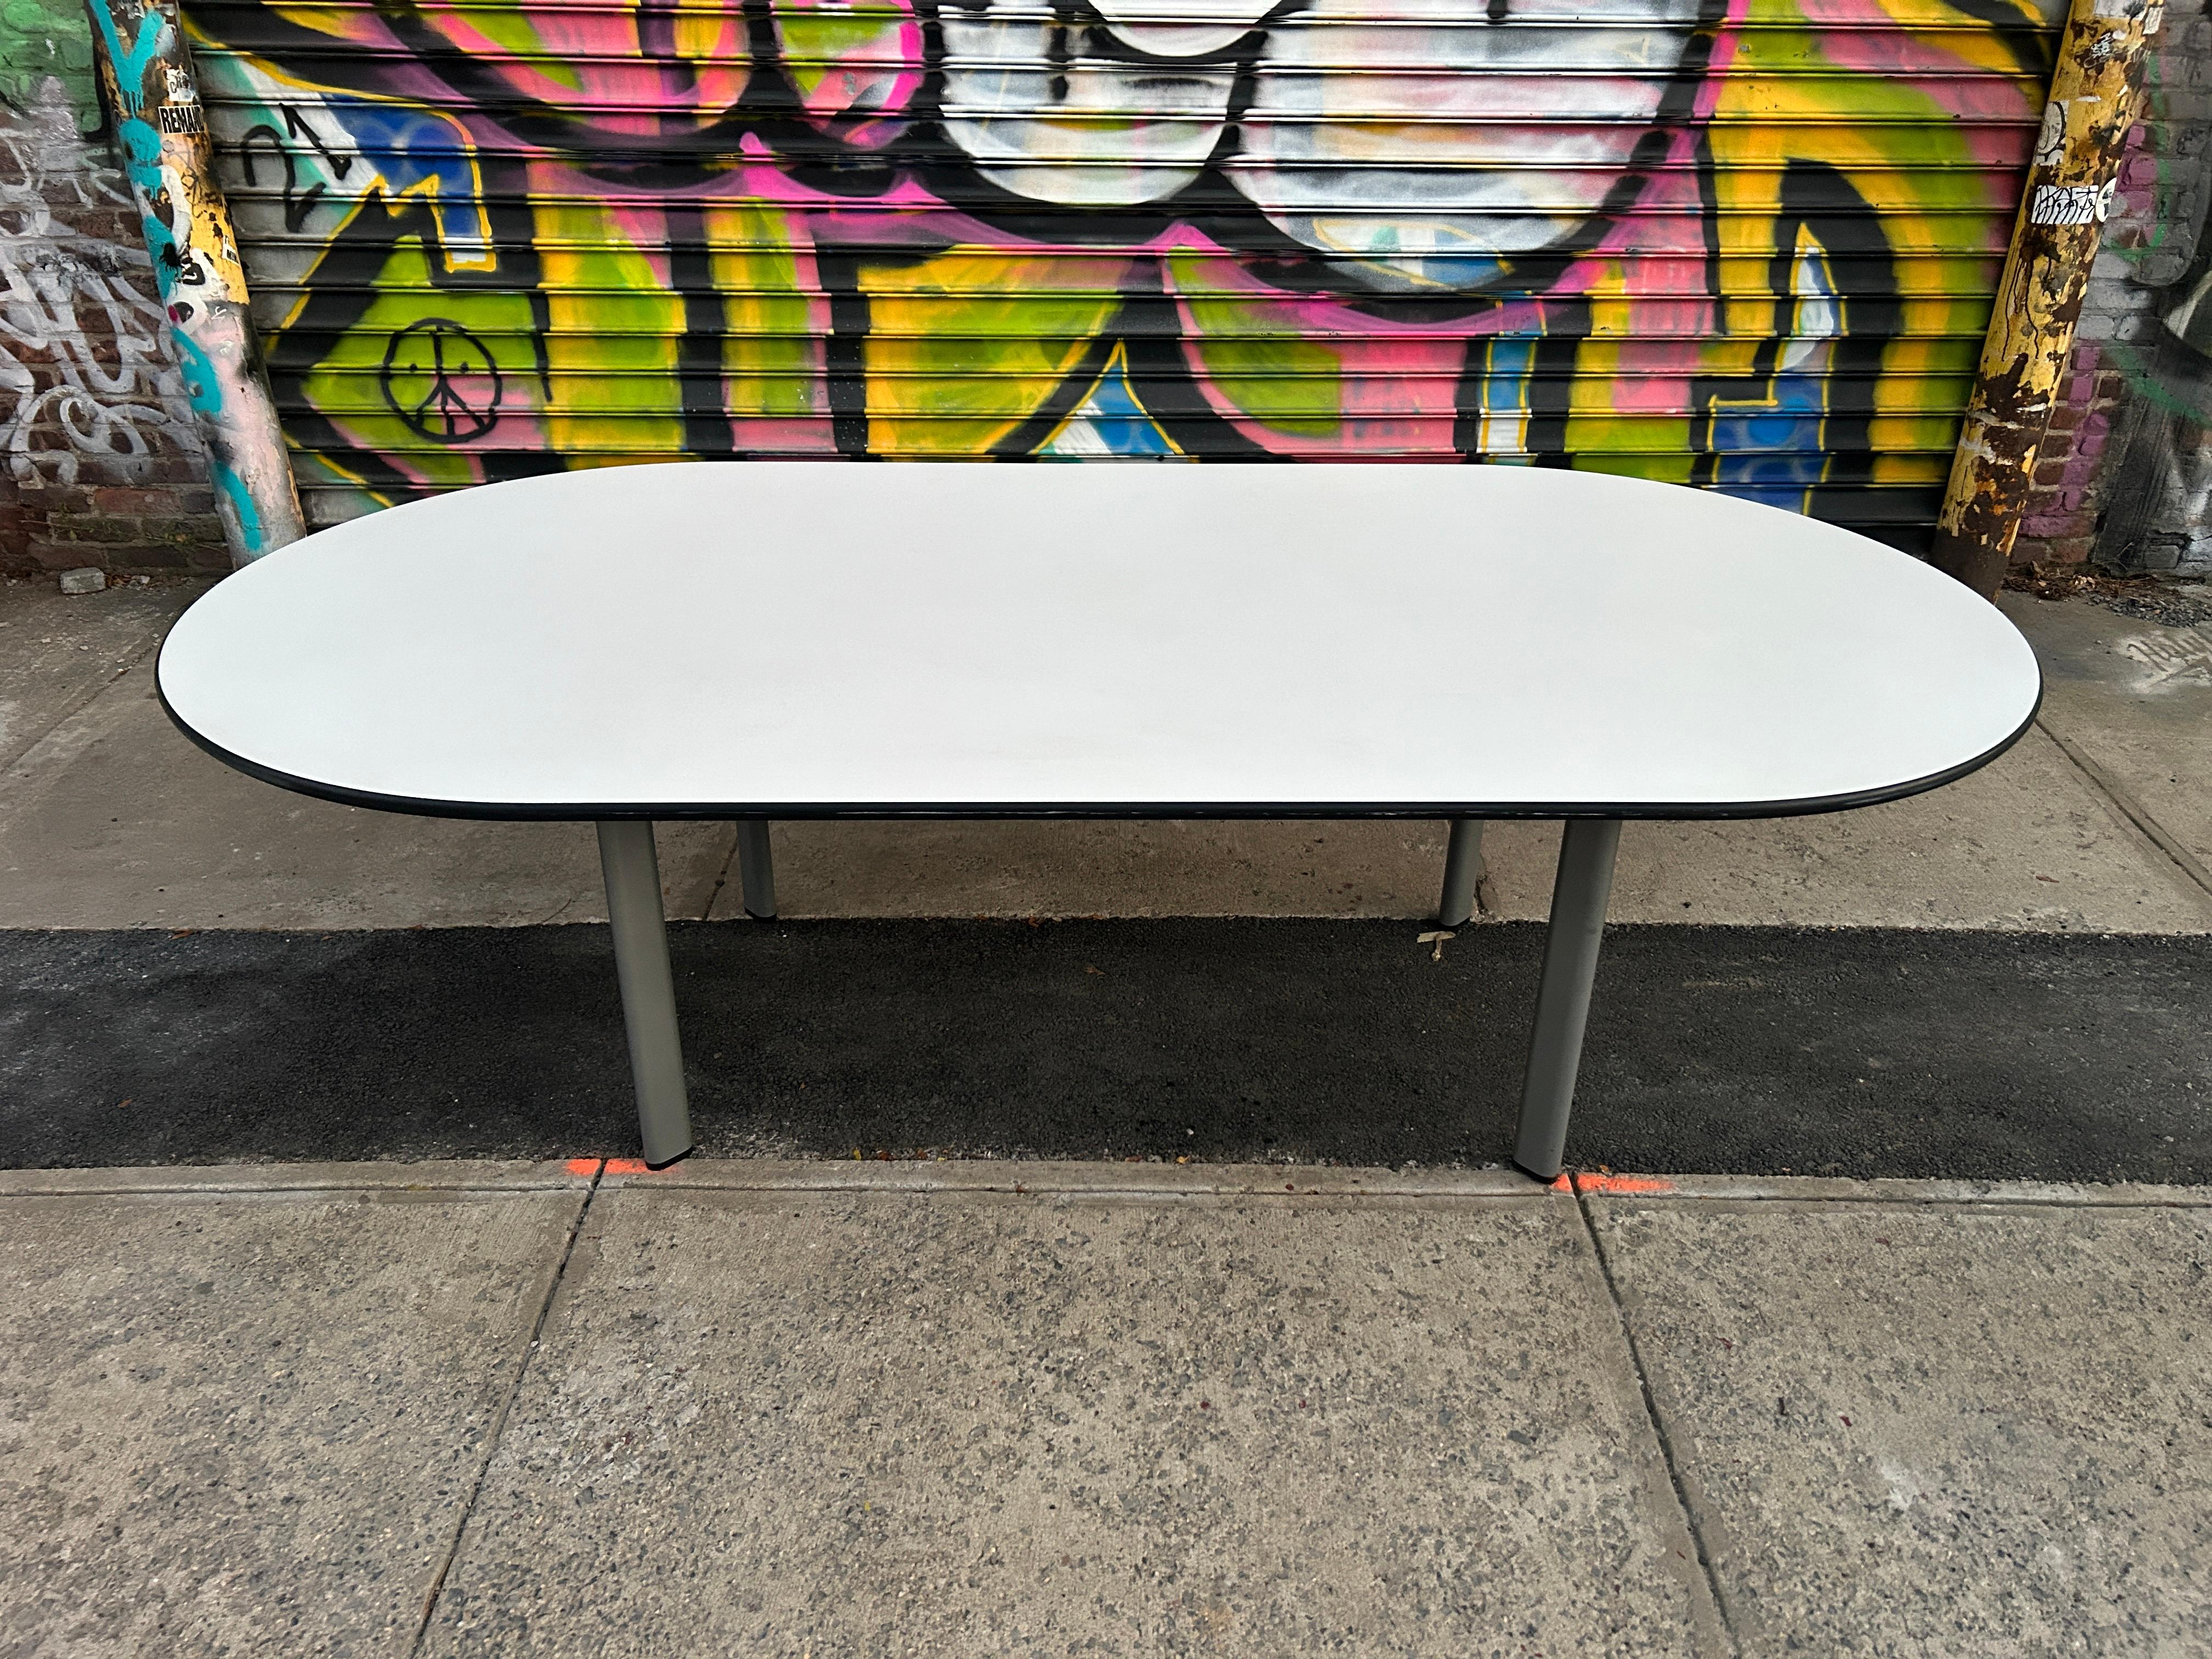 Post modern Knoll white laminate racetrack dining table by joe d'urso. Simple design oval conference or dining table with white laminate top and rubber edge molding that sits on 4 steel oval tube legs with frame. Legs unbolt and base unscrews. Good